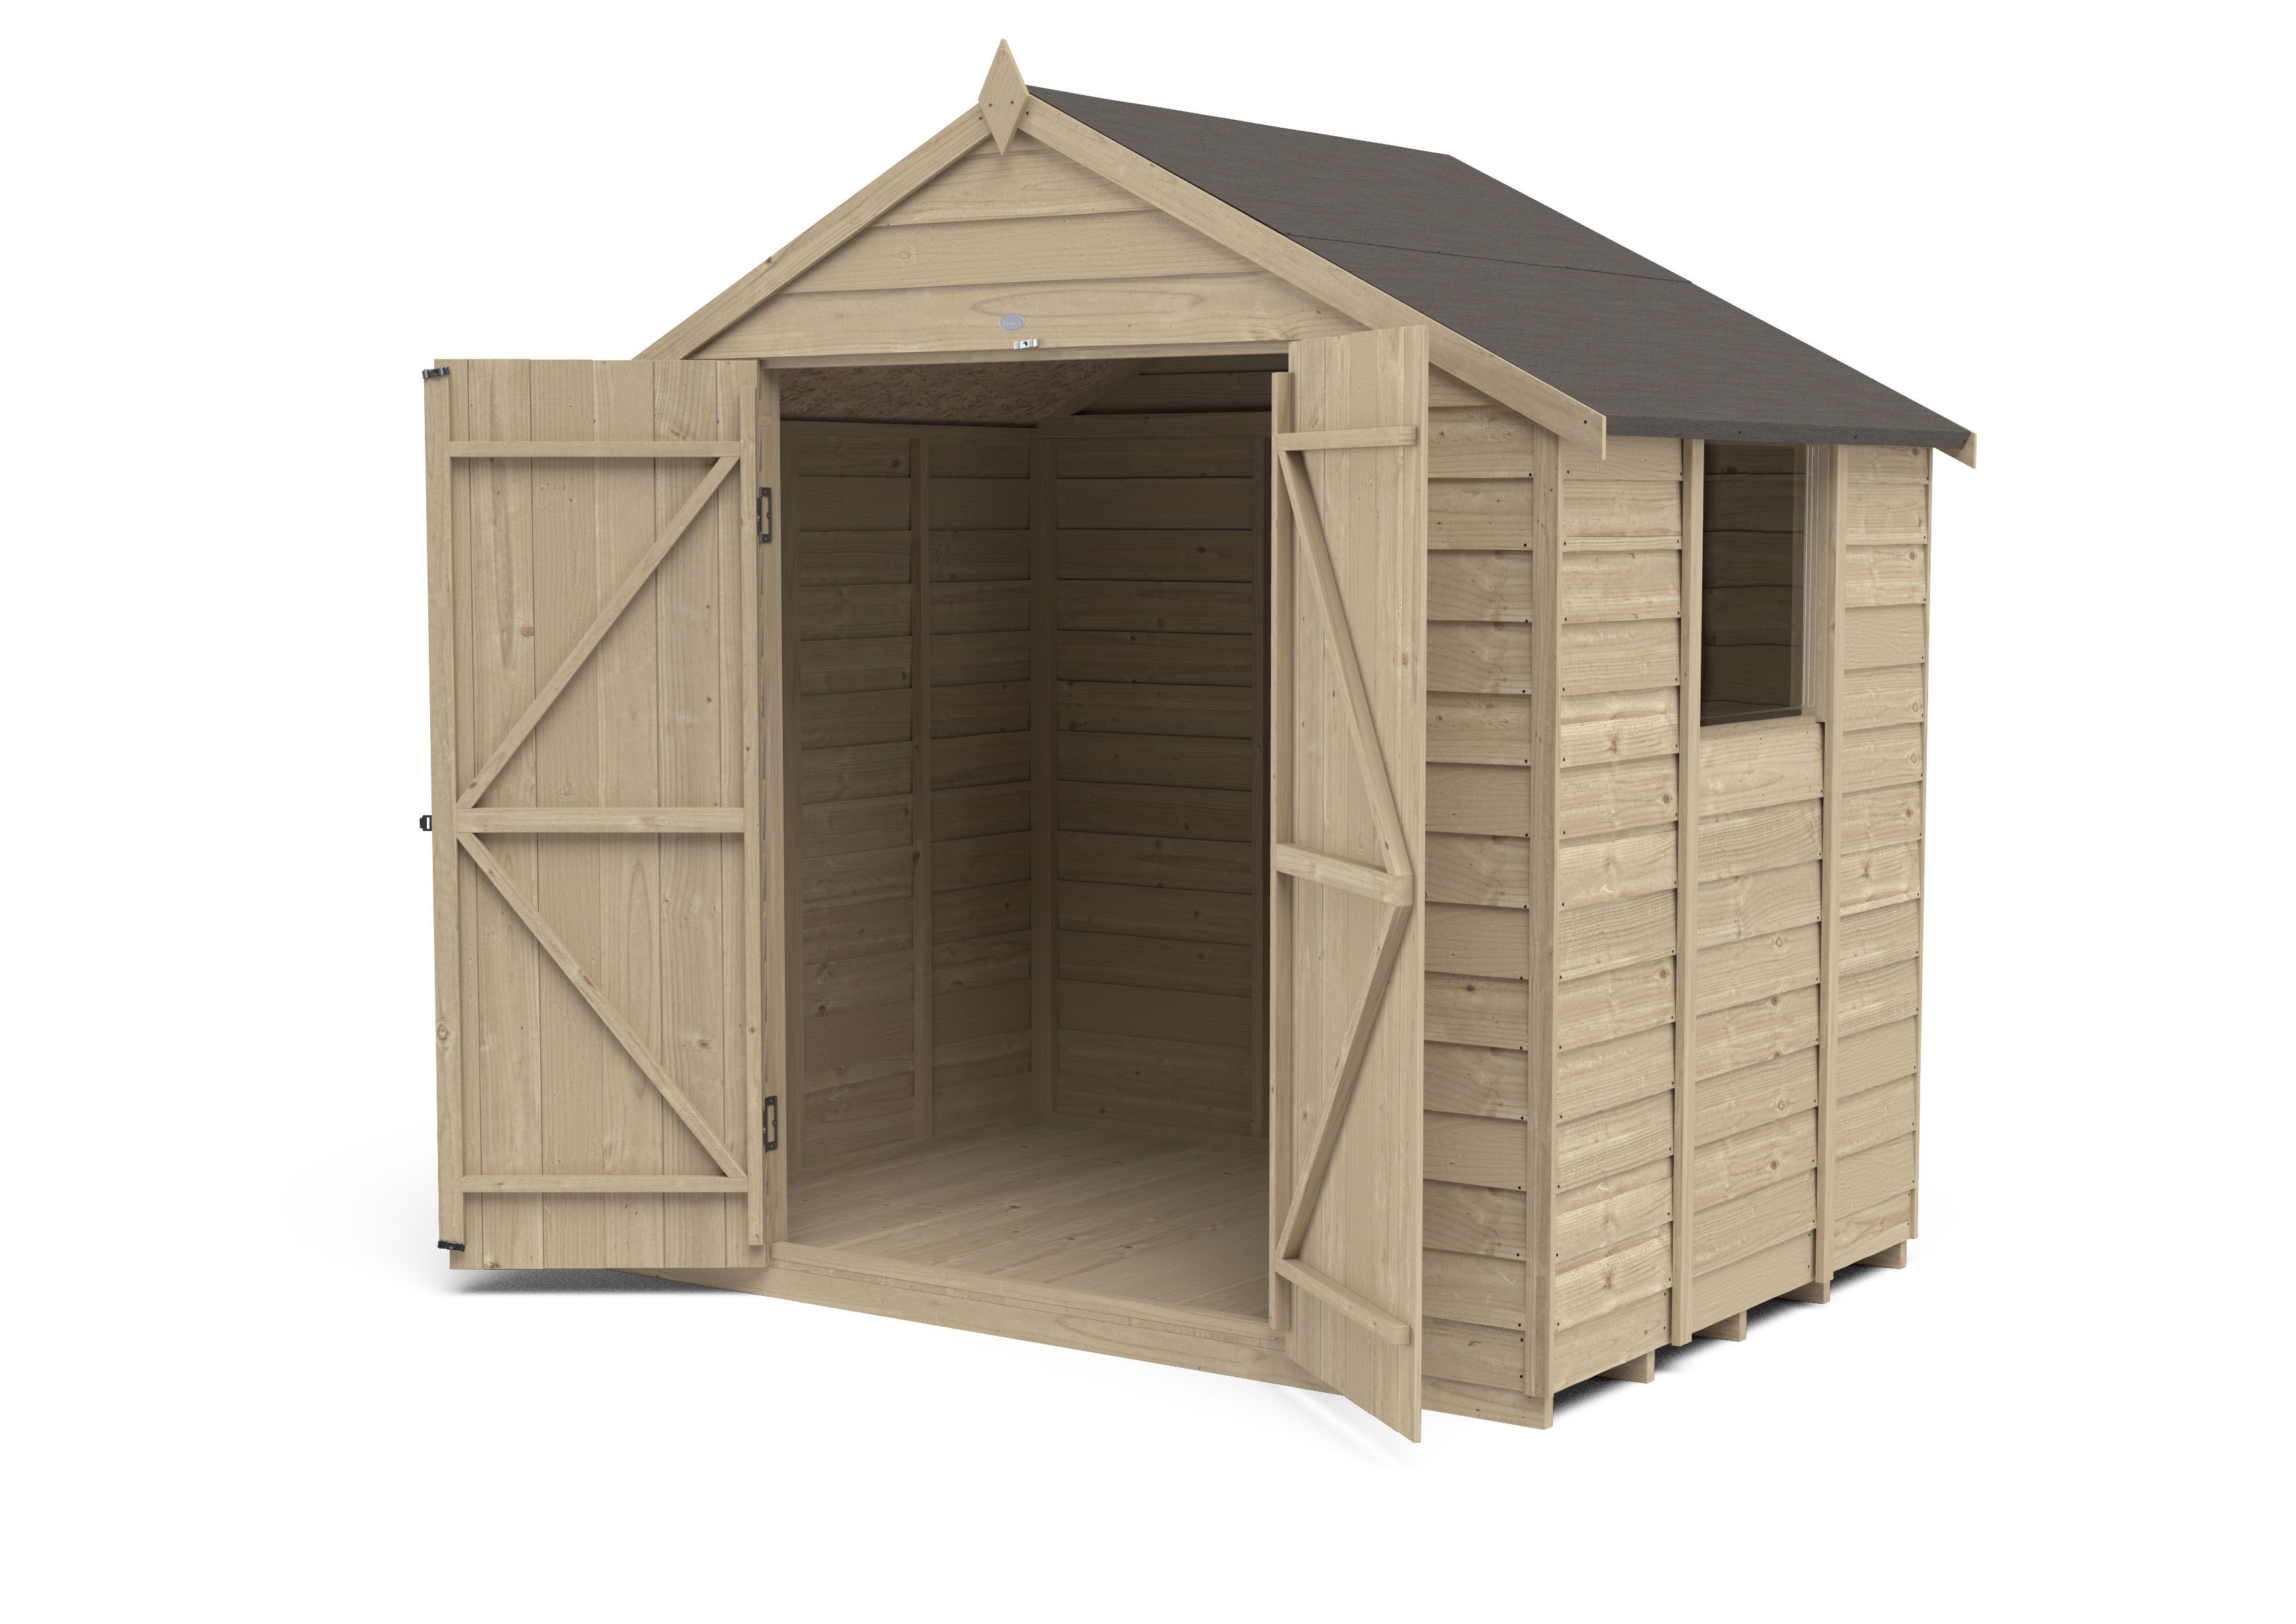 Forest Garden Overlap 7x5 ft Apex Wooden Pressure treated 2 door Shed with floor & 1 window (Base included)